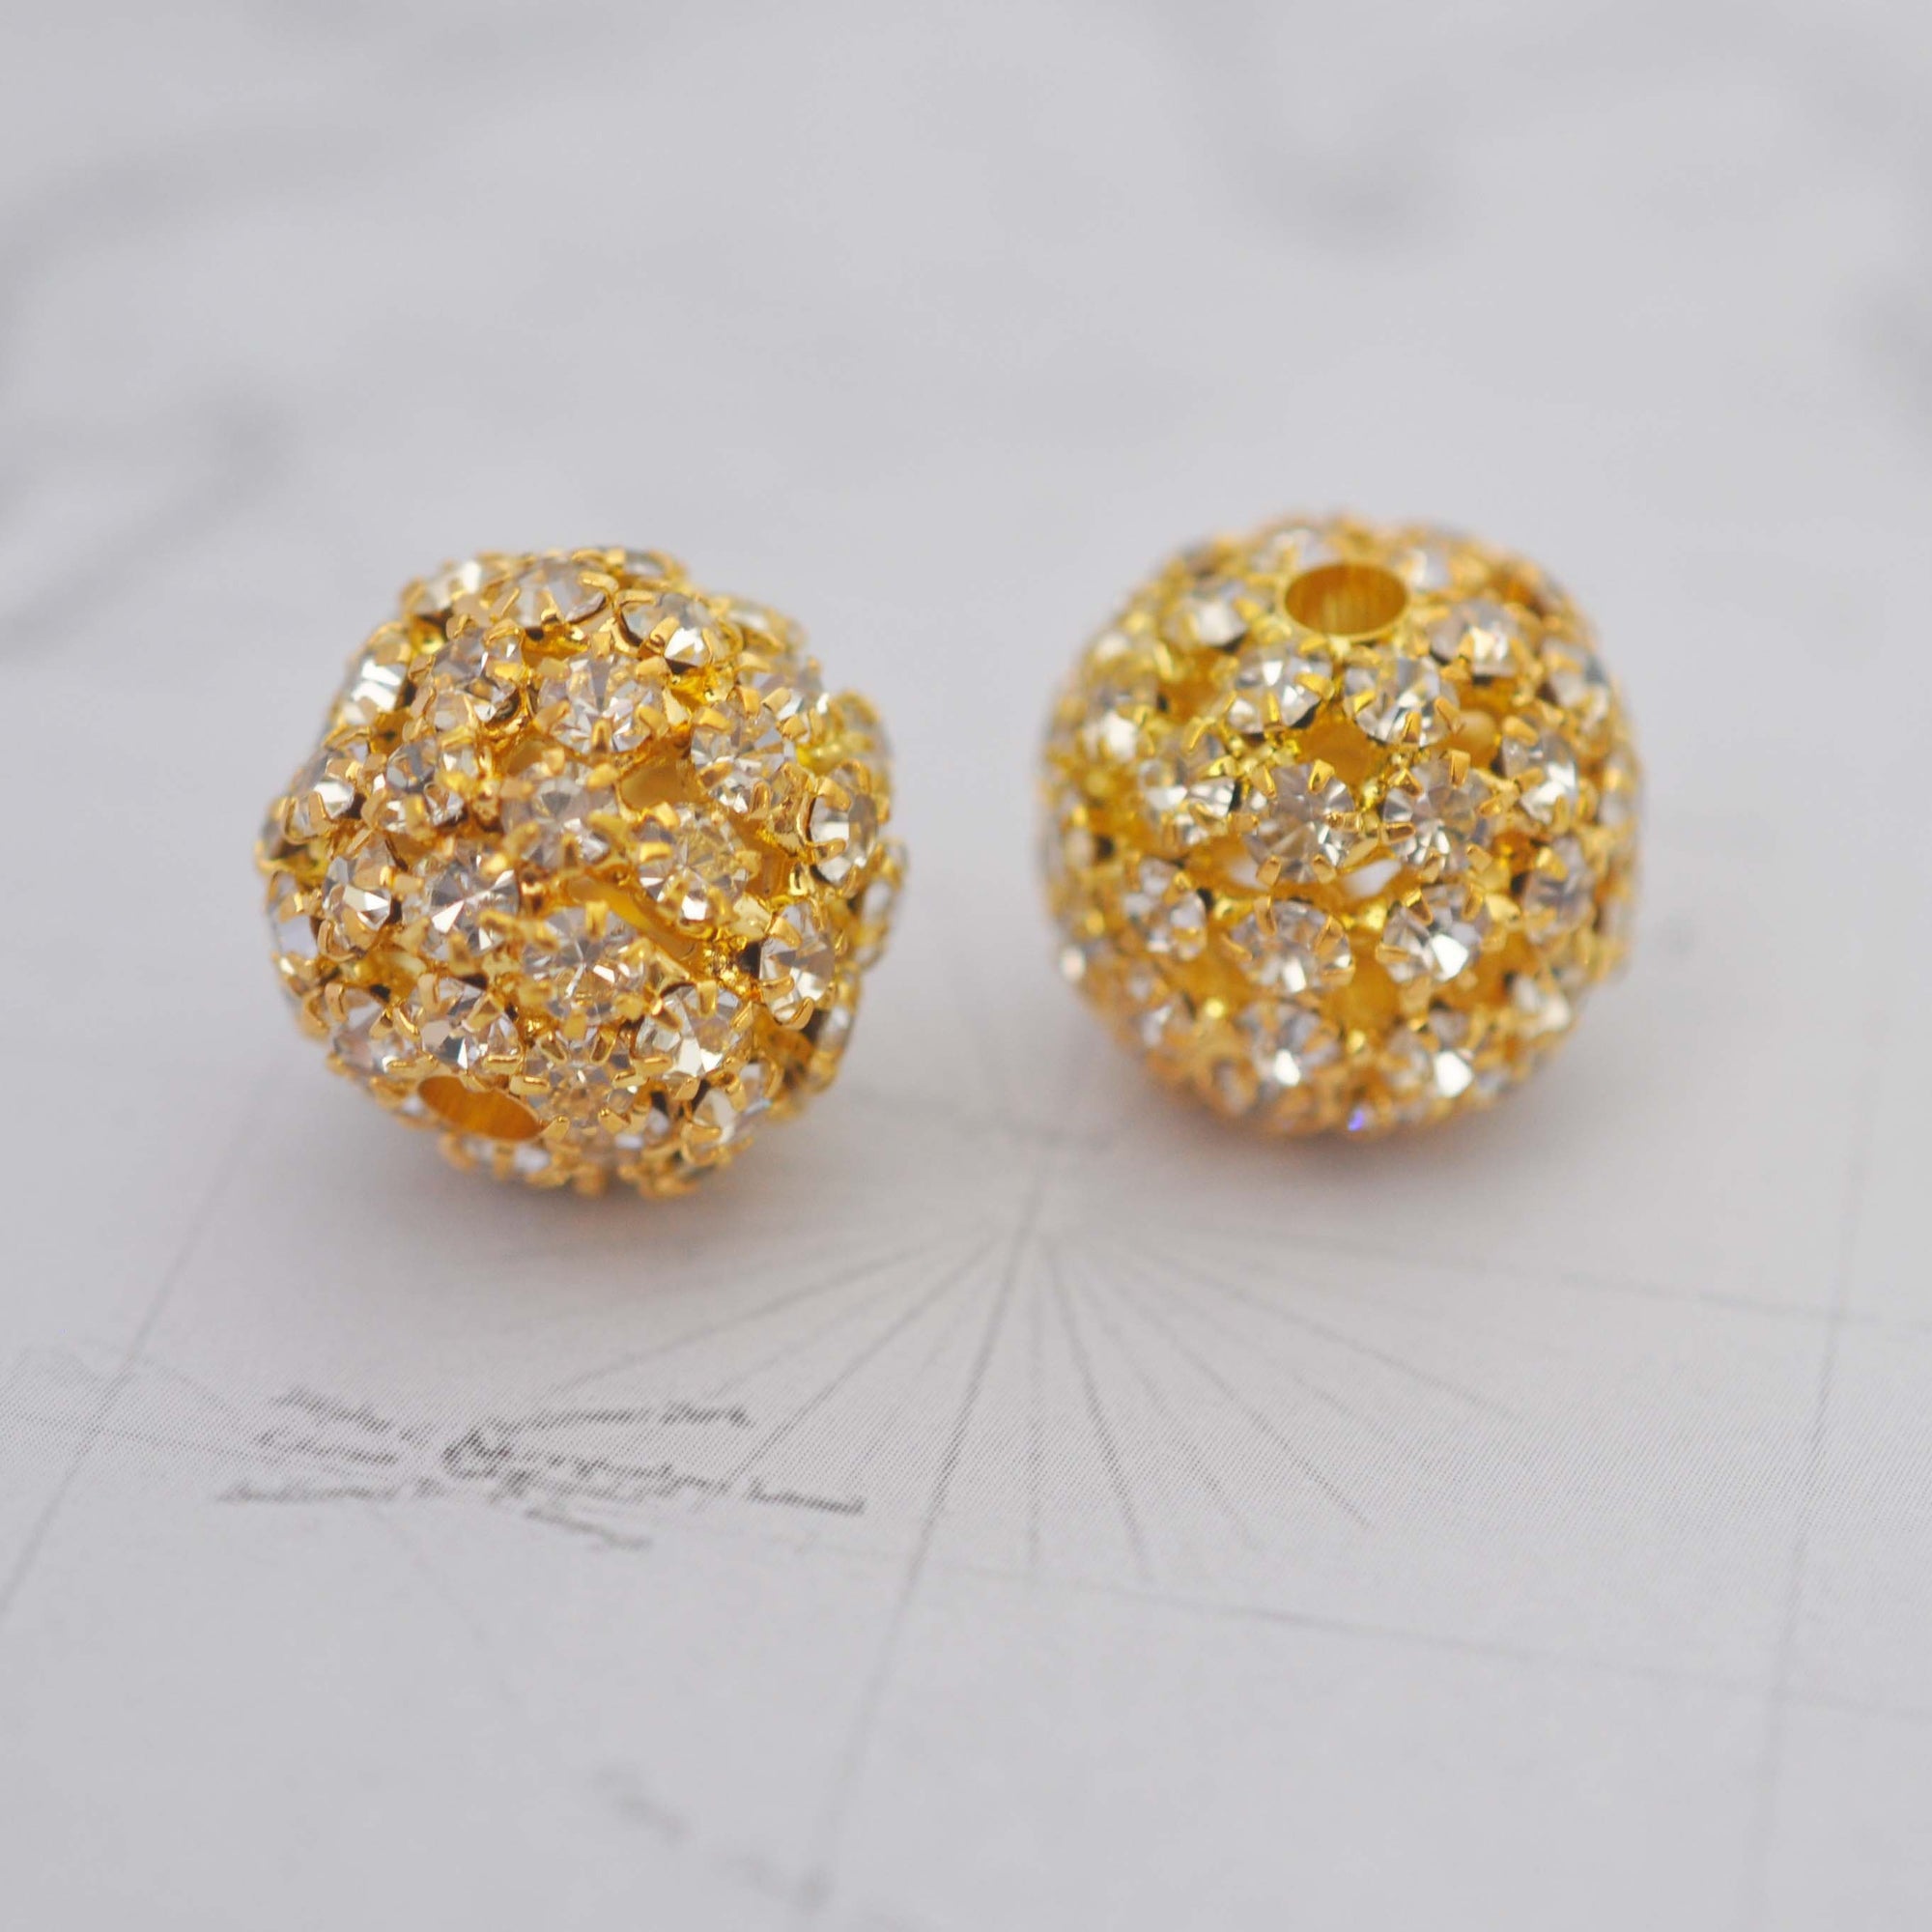 Large Gold Plated Rhinestone Bead Balls 18MM - Pair Of Bead Balls (2 Pieces)